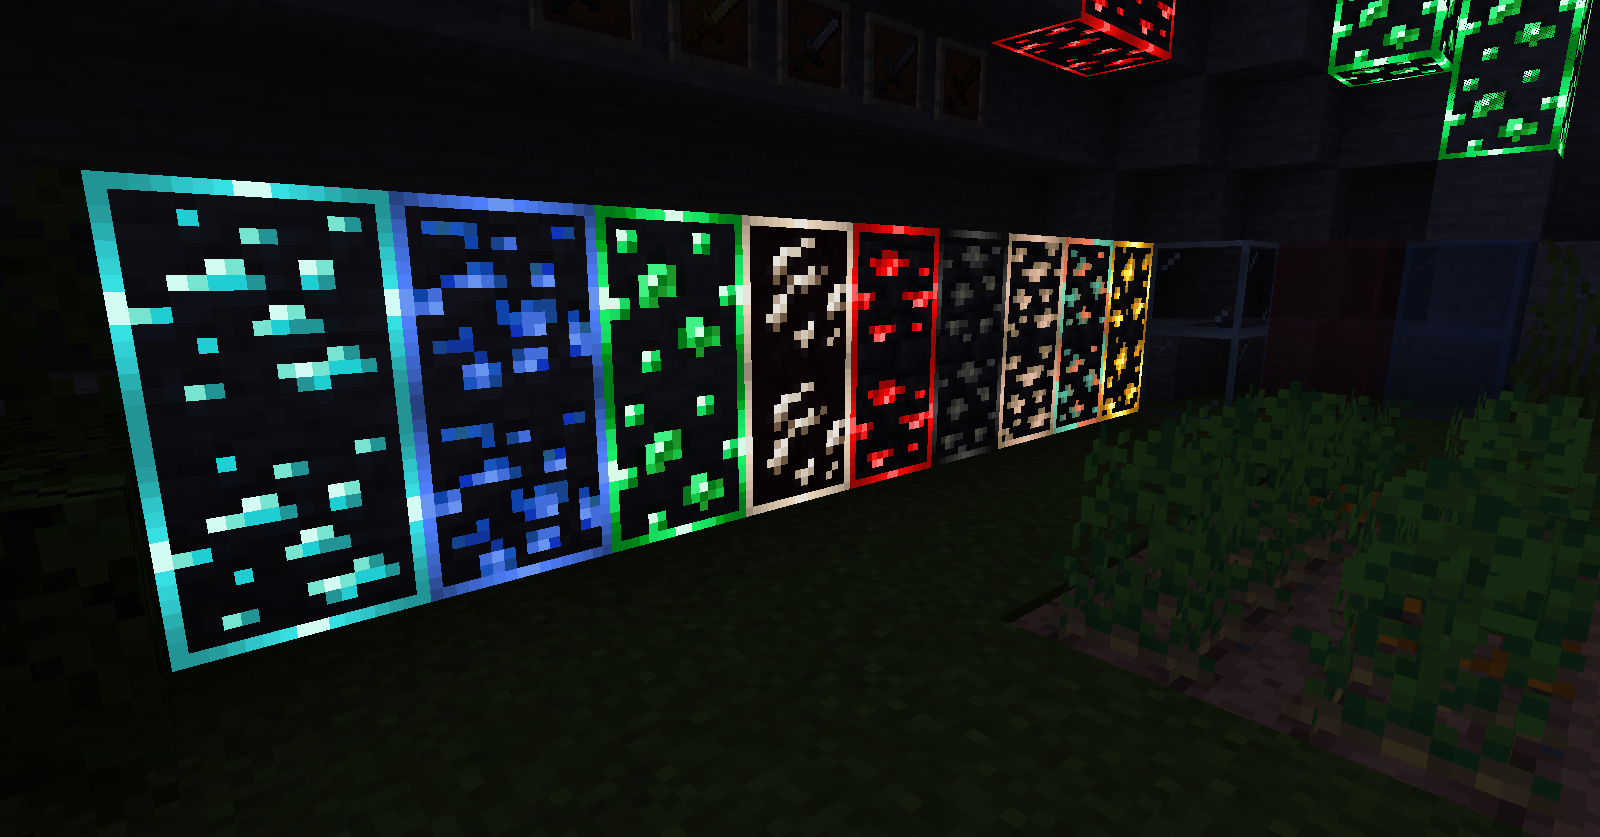 Every ore is glowing and connected!